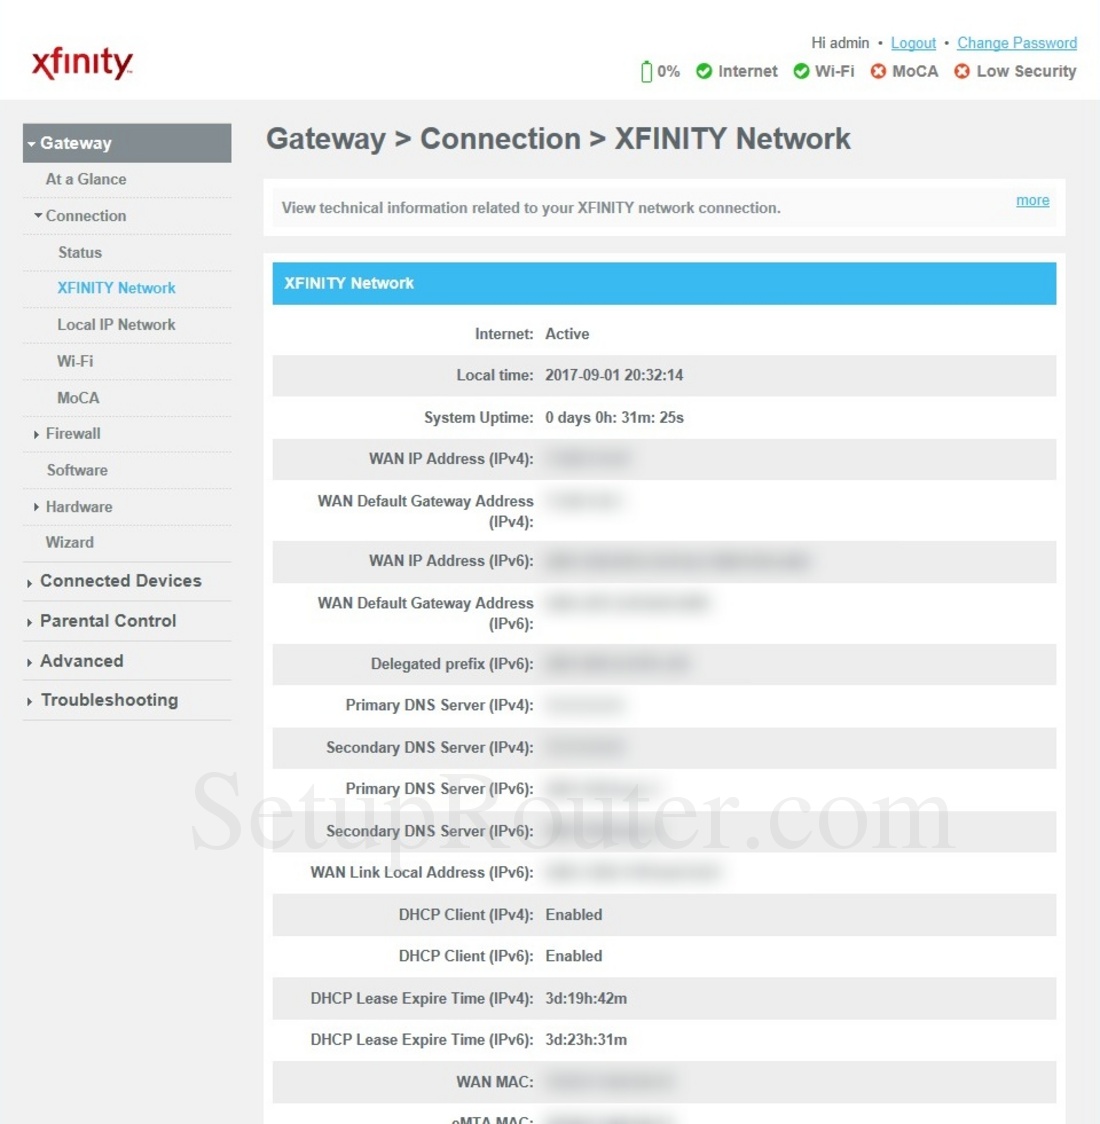 xfinity router